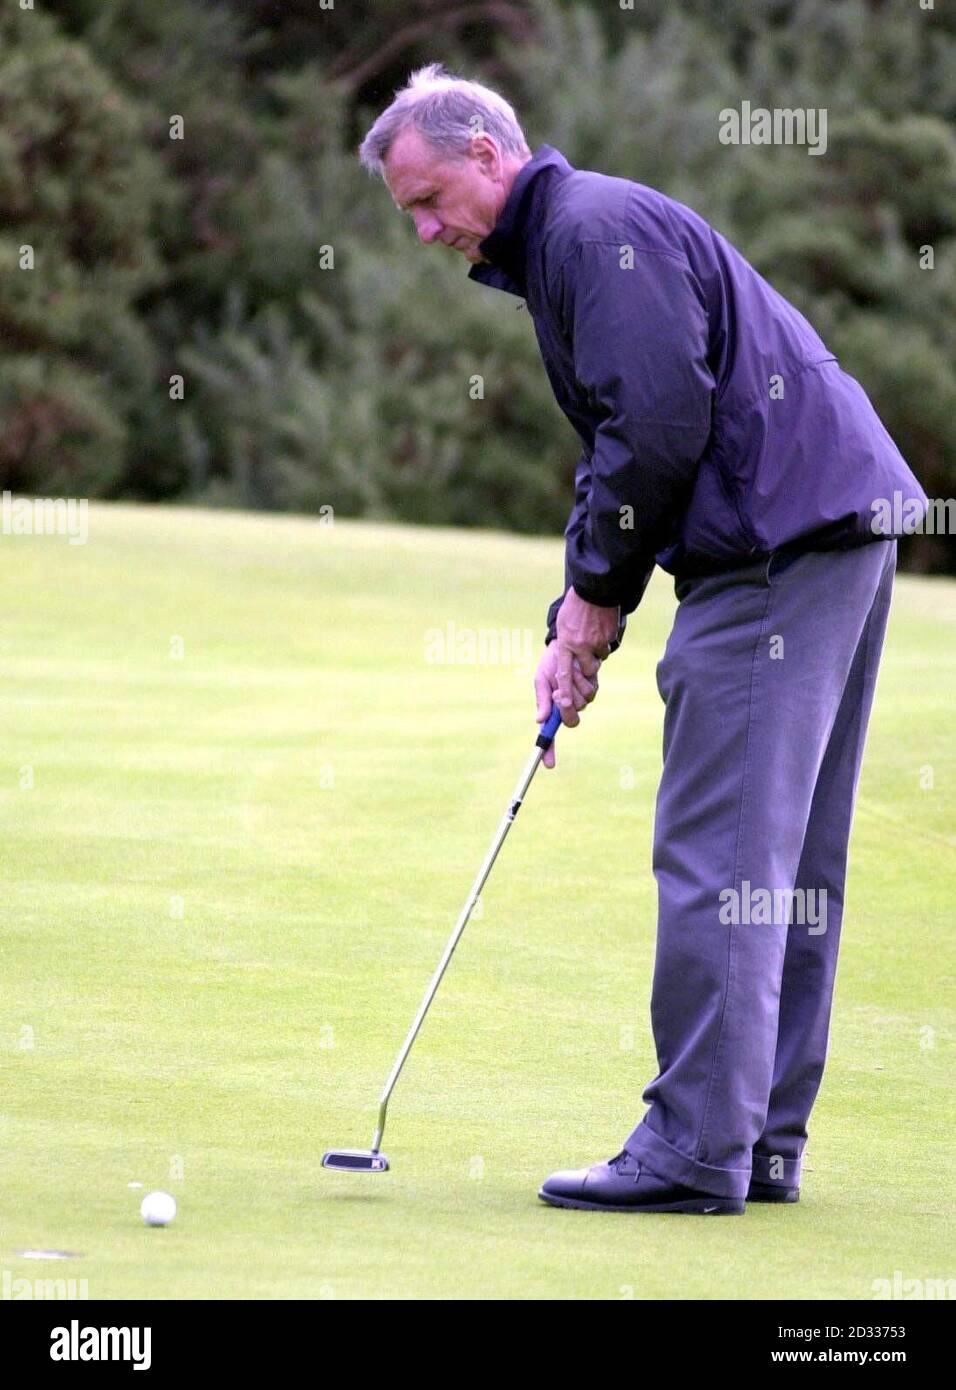 Former dutch footballer Johan Cruyff putting during the second round of the pro-am celebrity, Dunhill Links Championships at Carnoustie Golf course. Stock Photo